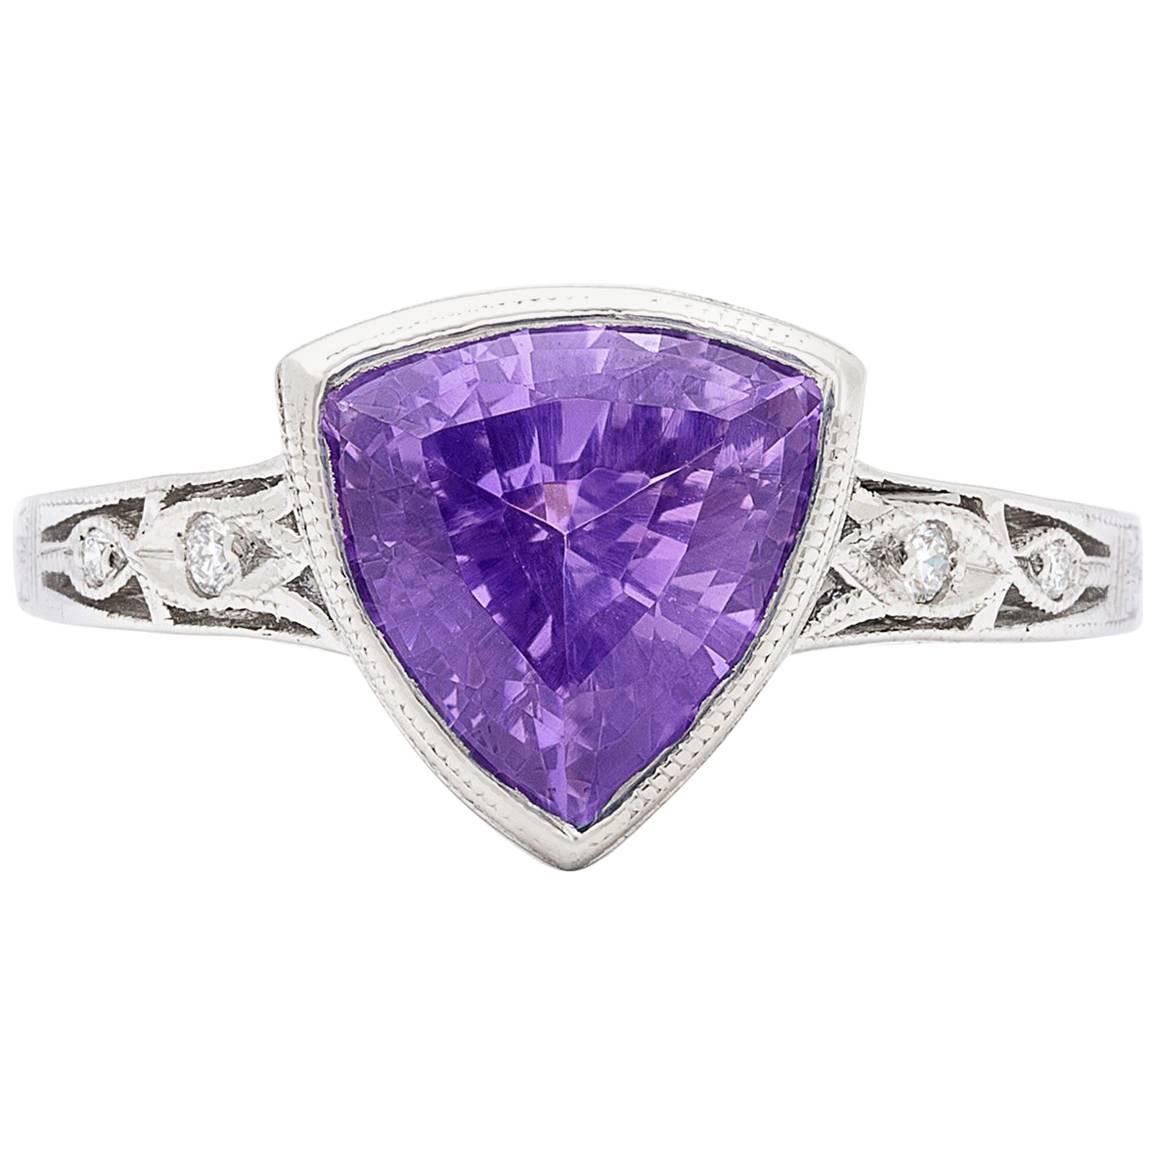 Exceptional Unheated Natural Bluish Violet Sapphire 3.38 Carat Ring